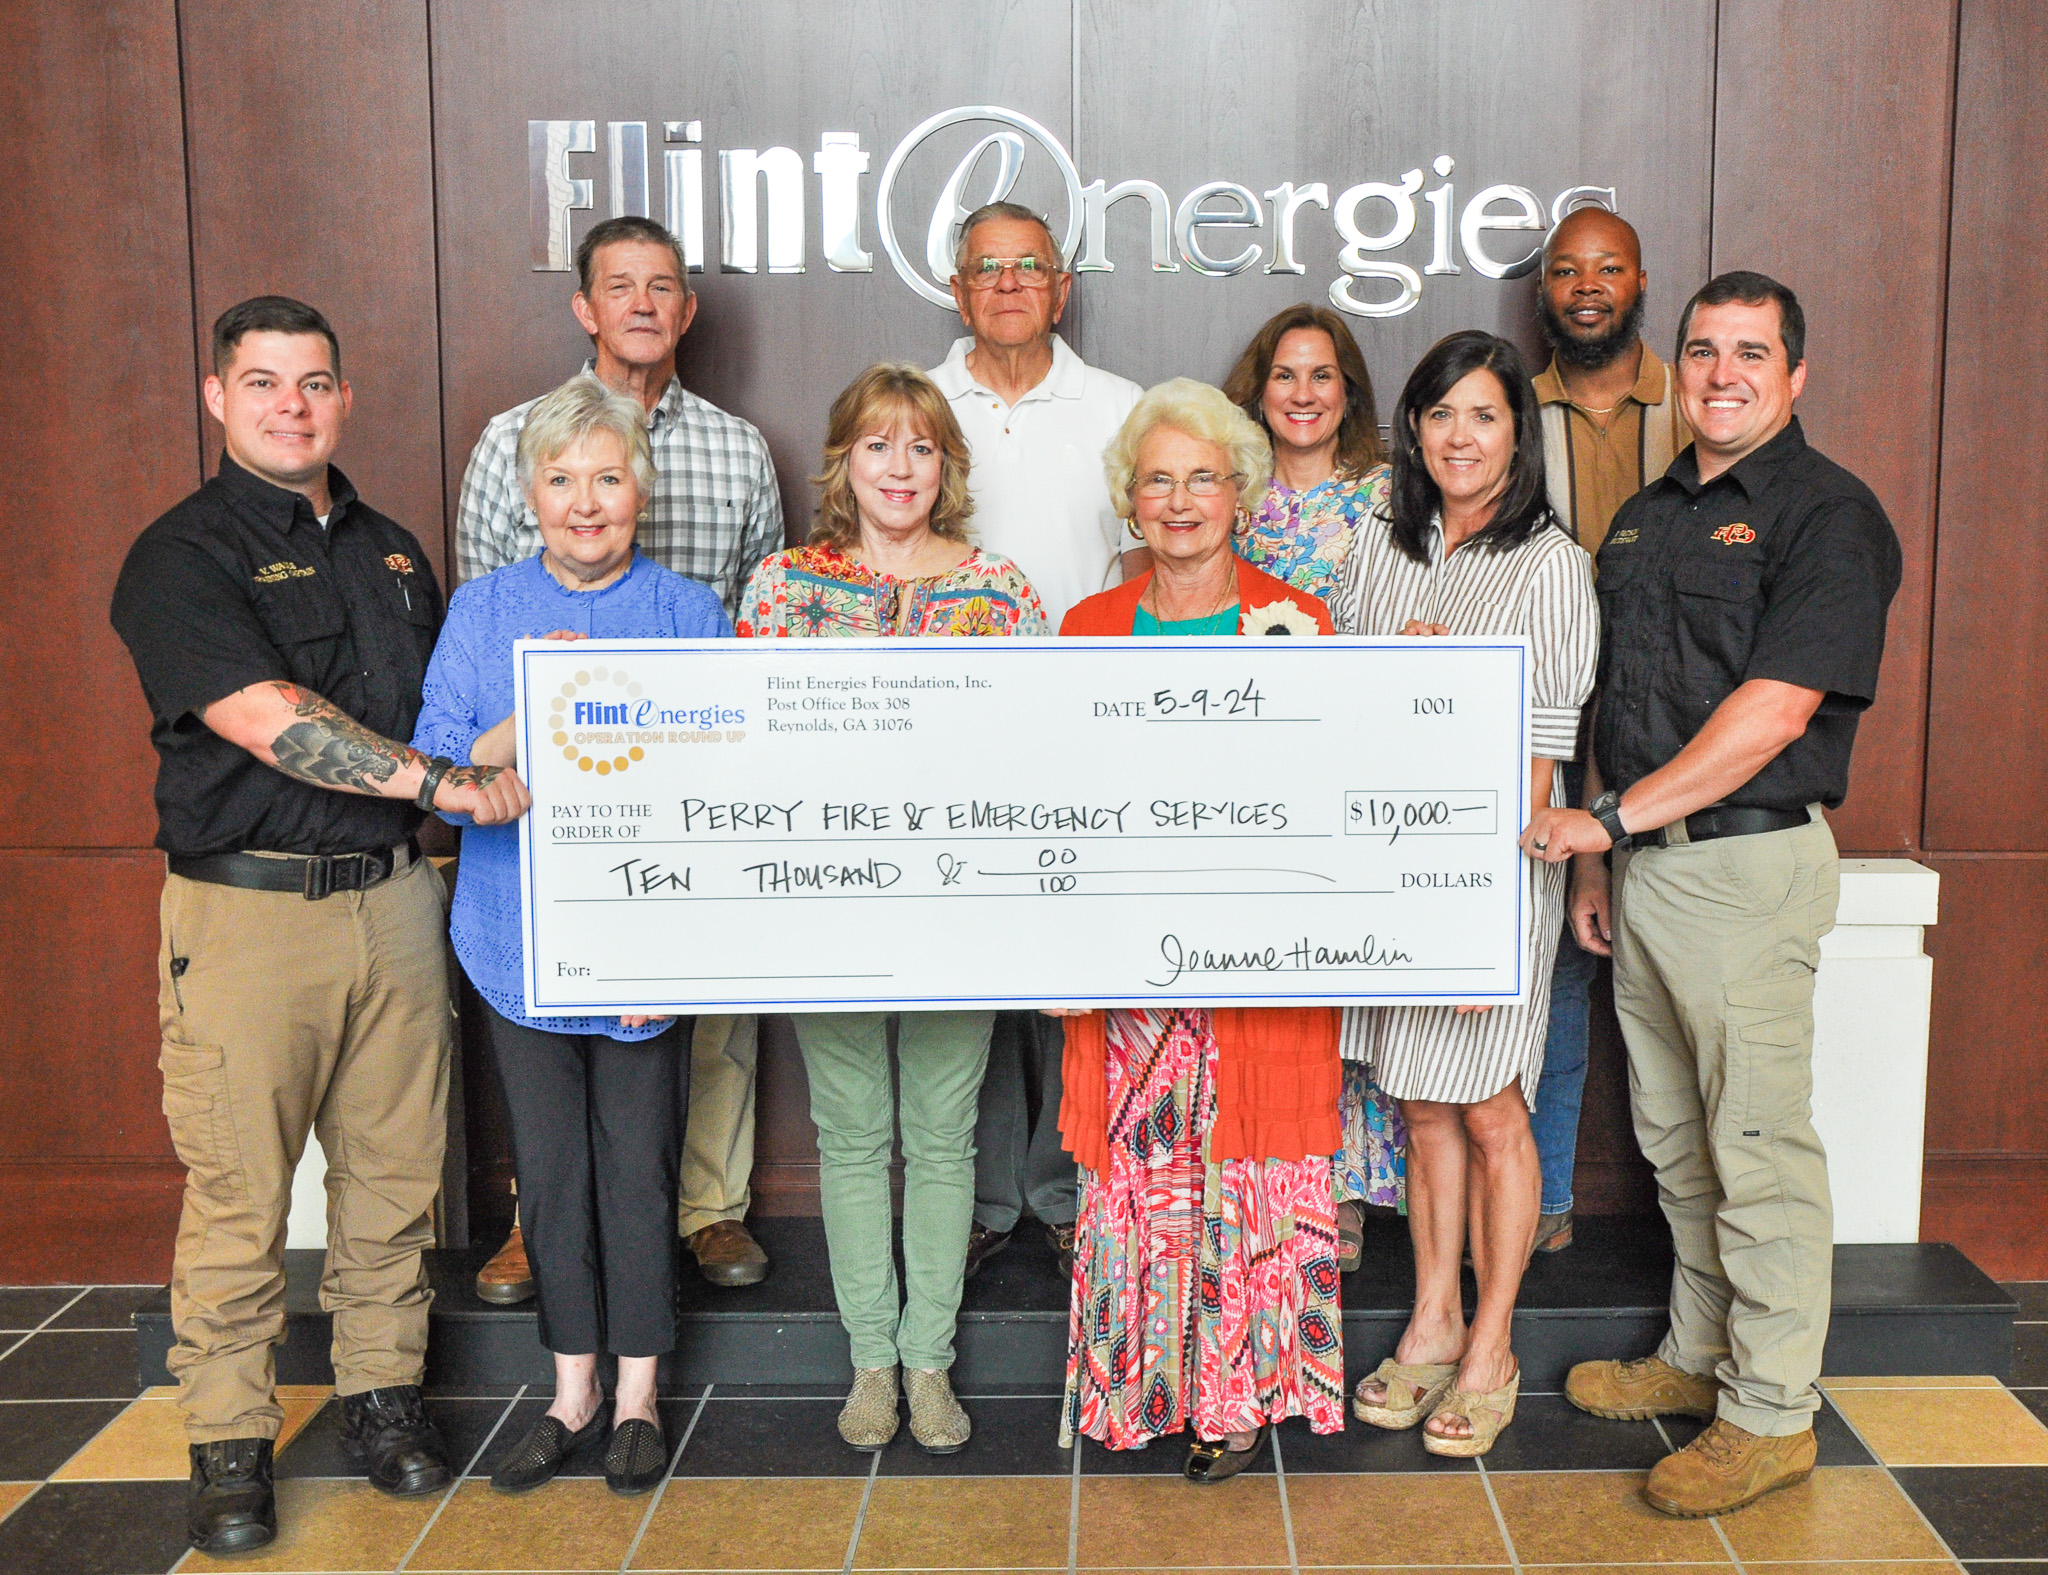 Photo for Perry Fire &amp; Emergency Services Receives $10,000 Grant from the Flint Energies Foundation